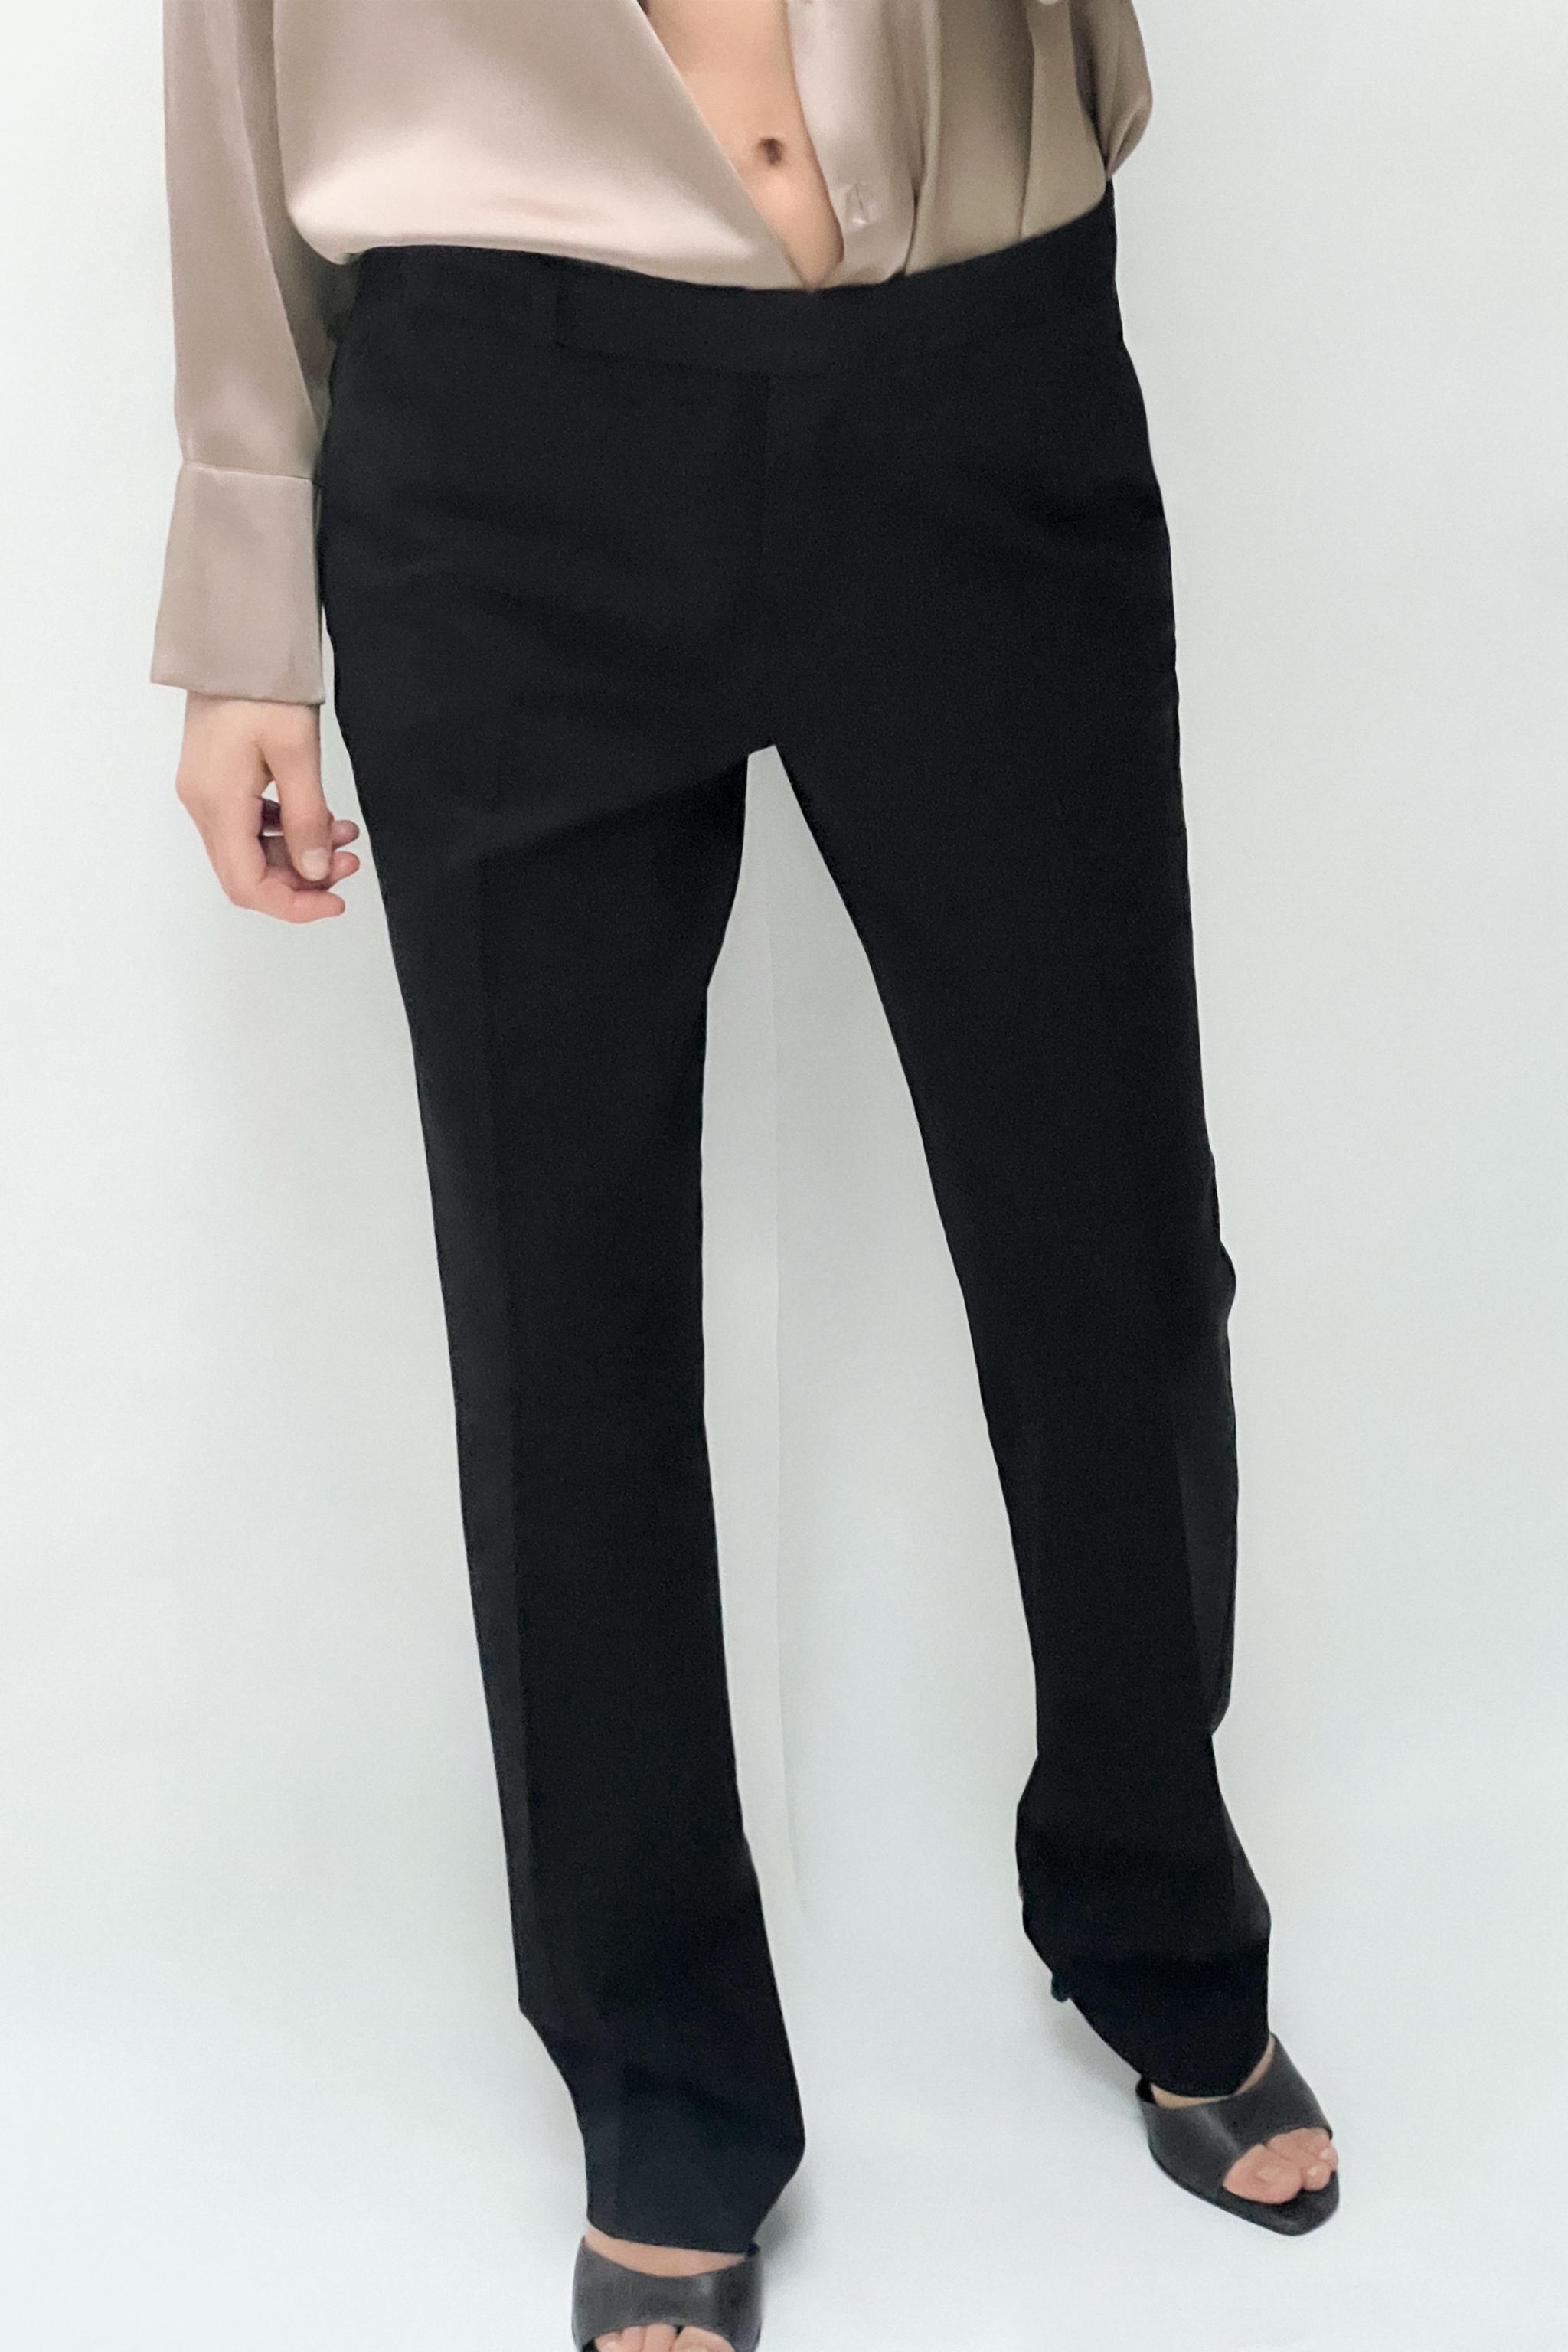 Xoxo Womens Natalie Ankle Trouser Dress Pants Black Mid Rise Stretch Size  12 NWT